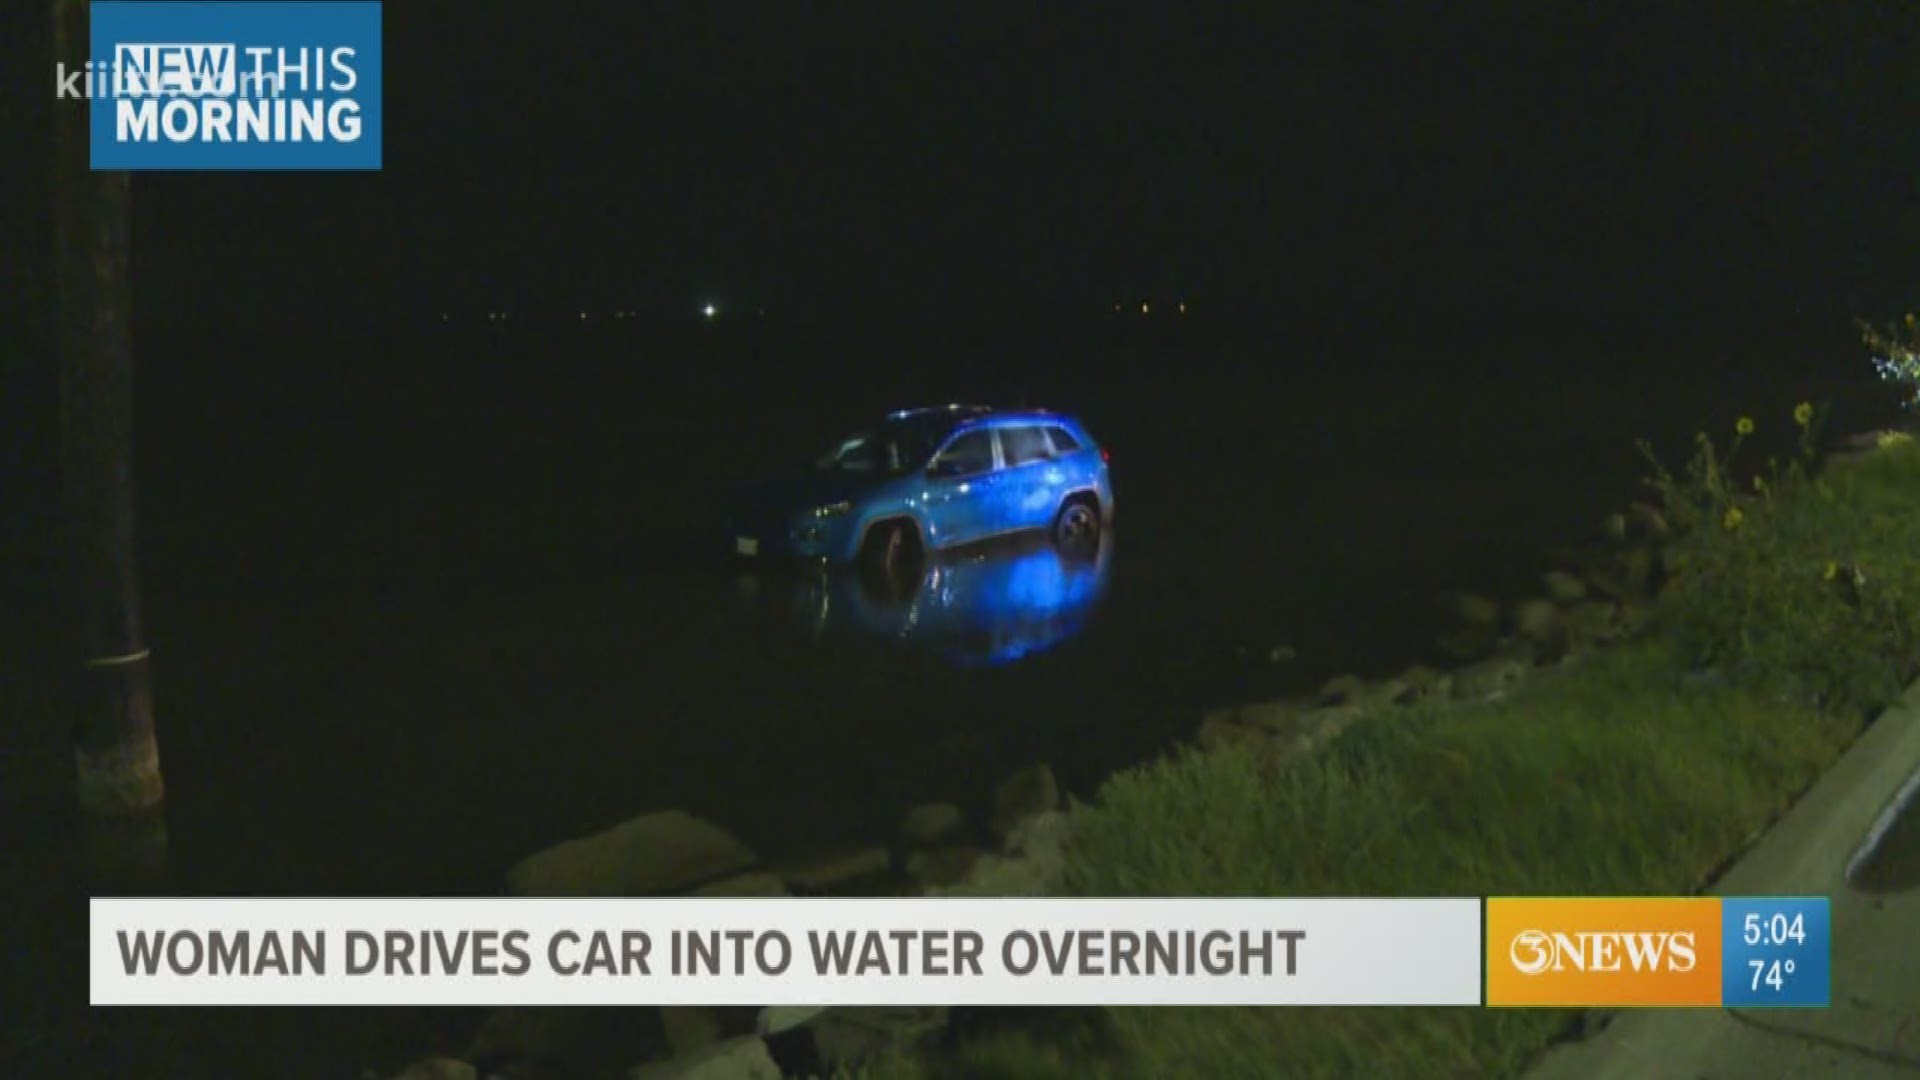 The woman was attempting to make a turn too fast and ended up putting her car into the water.